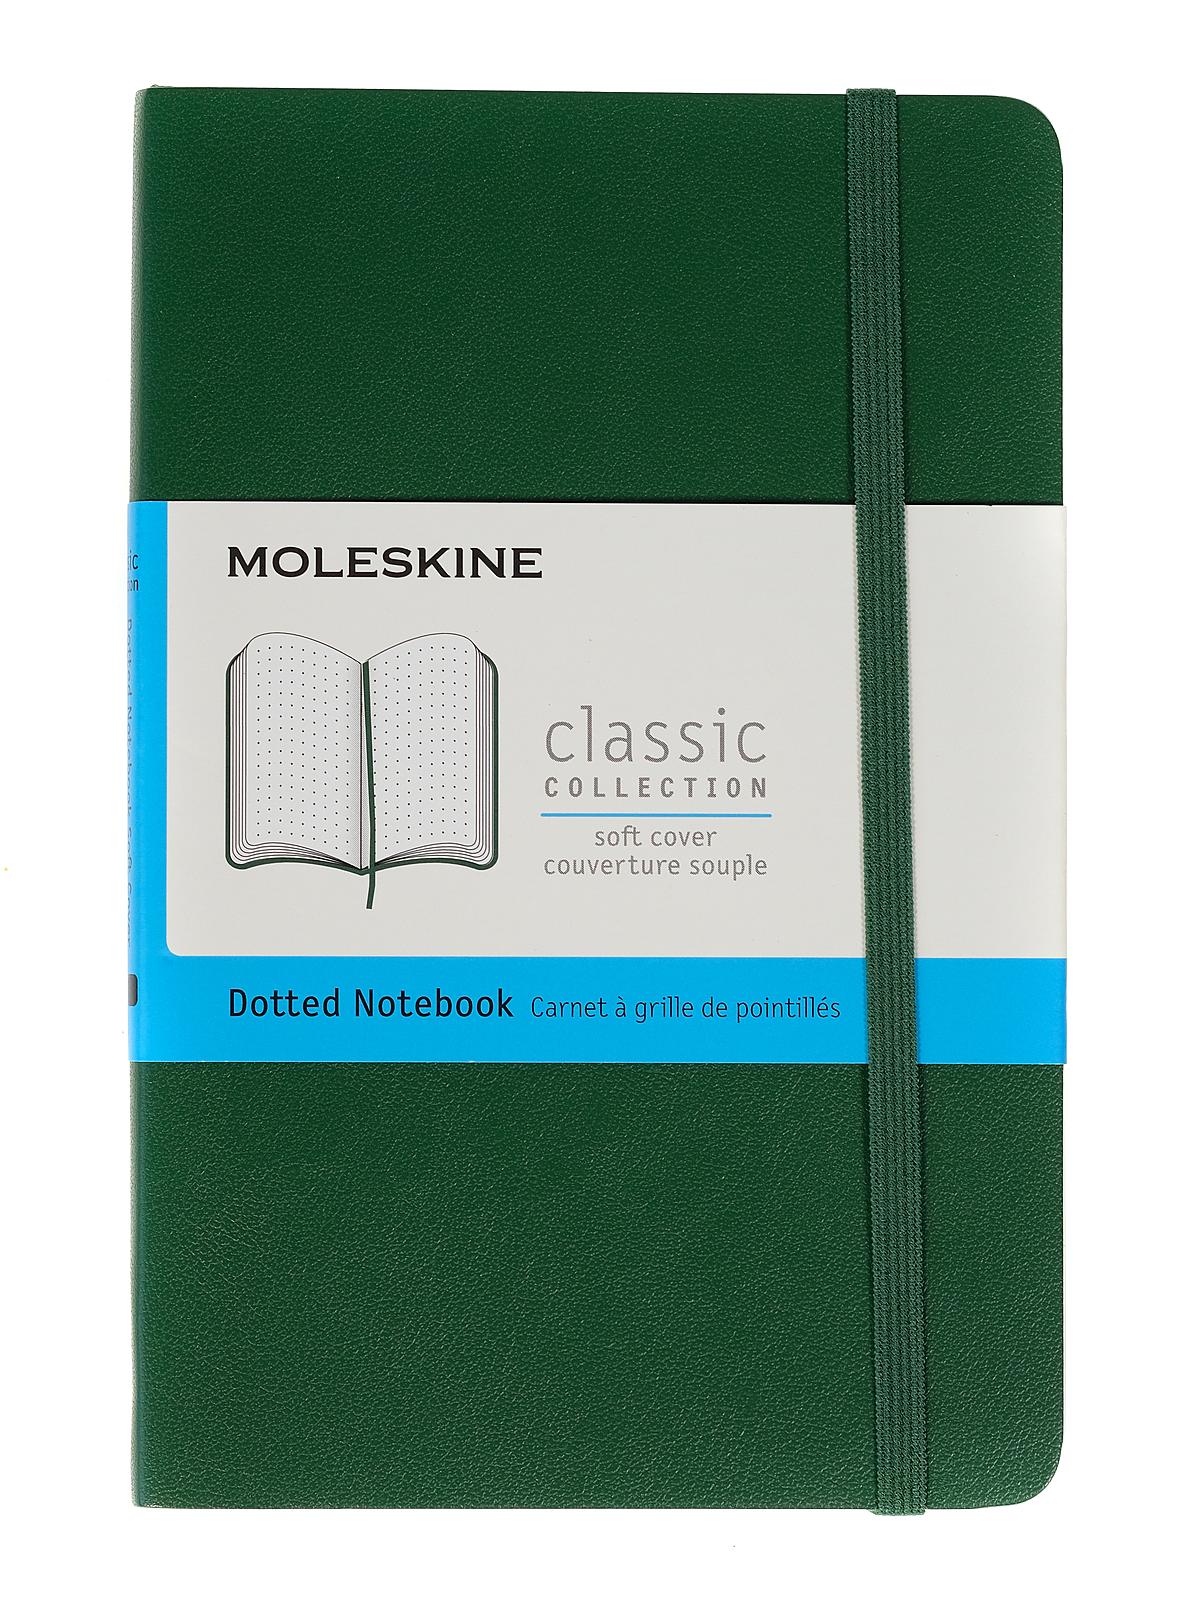 Classic Soft Cover Notebooks Myrtle Green 3 1 2 In. X 5 1 2 In. 192 Pages, Dotted